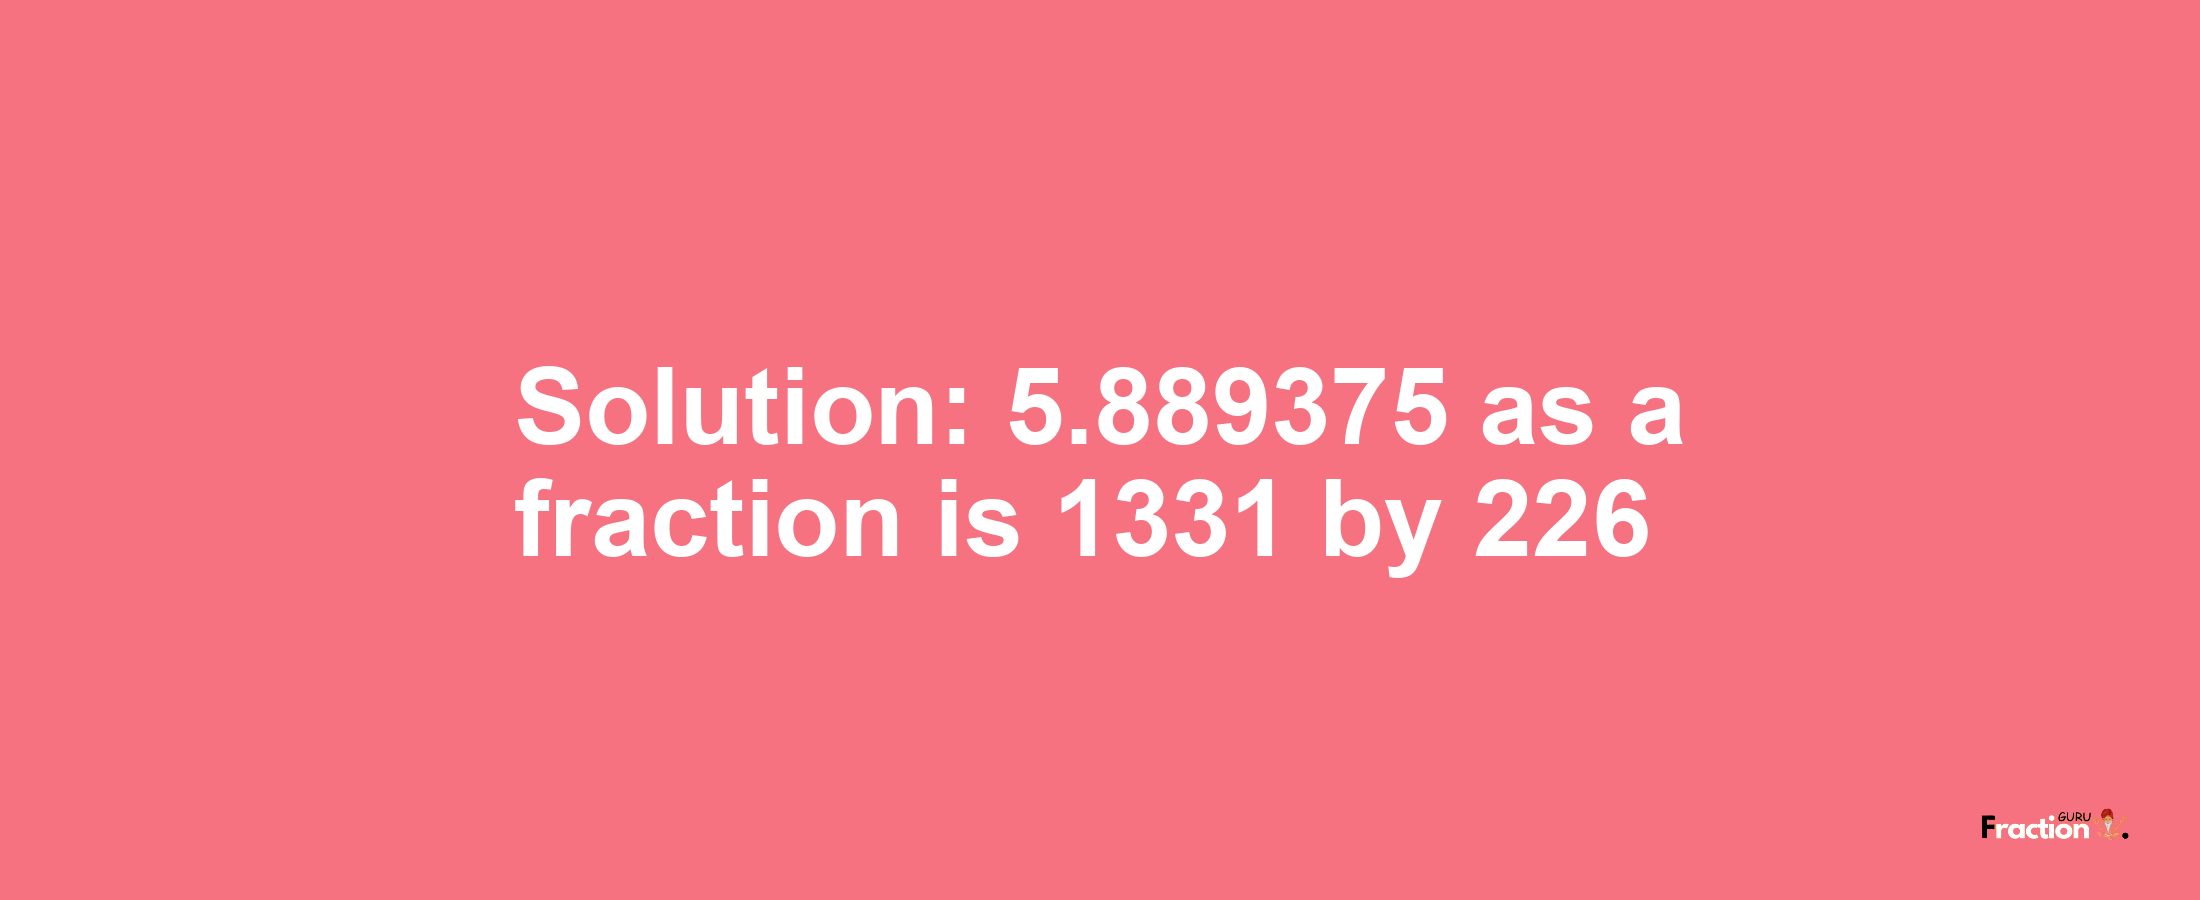 Solution:5.889375 as a fraction is 1331/226